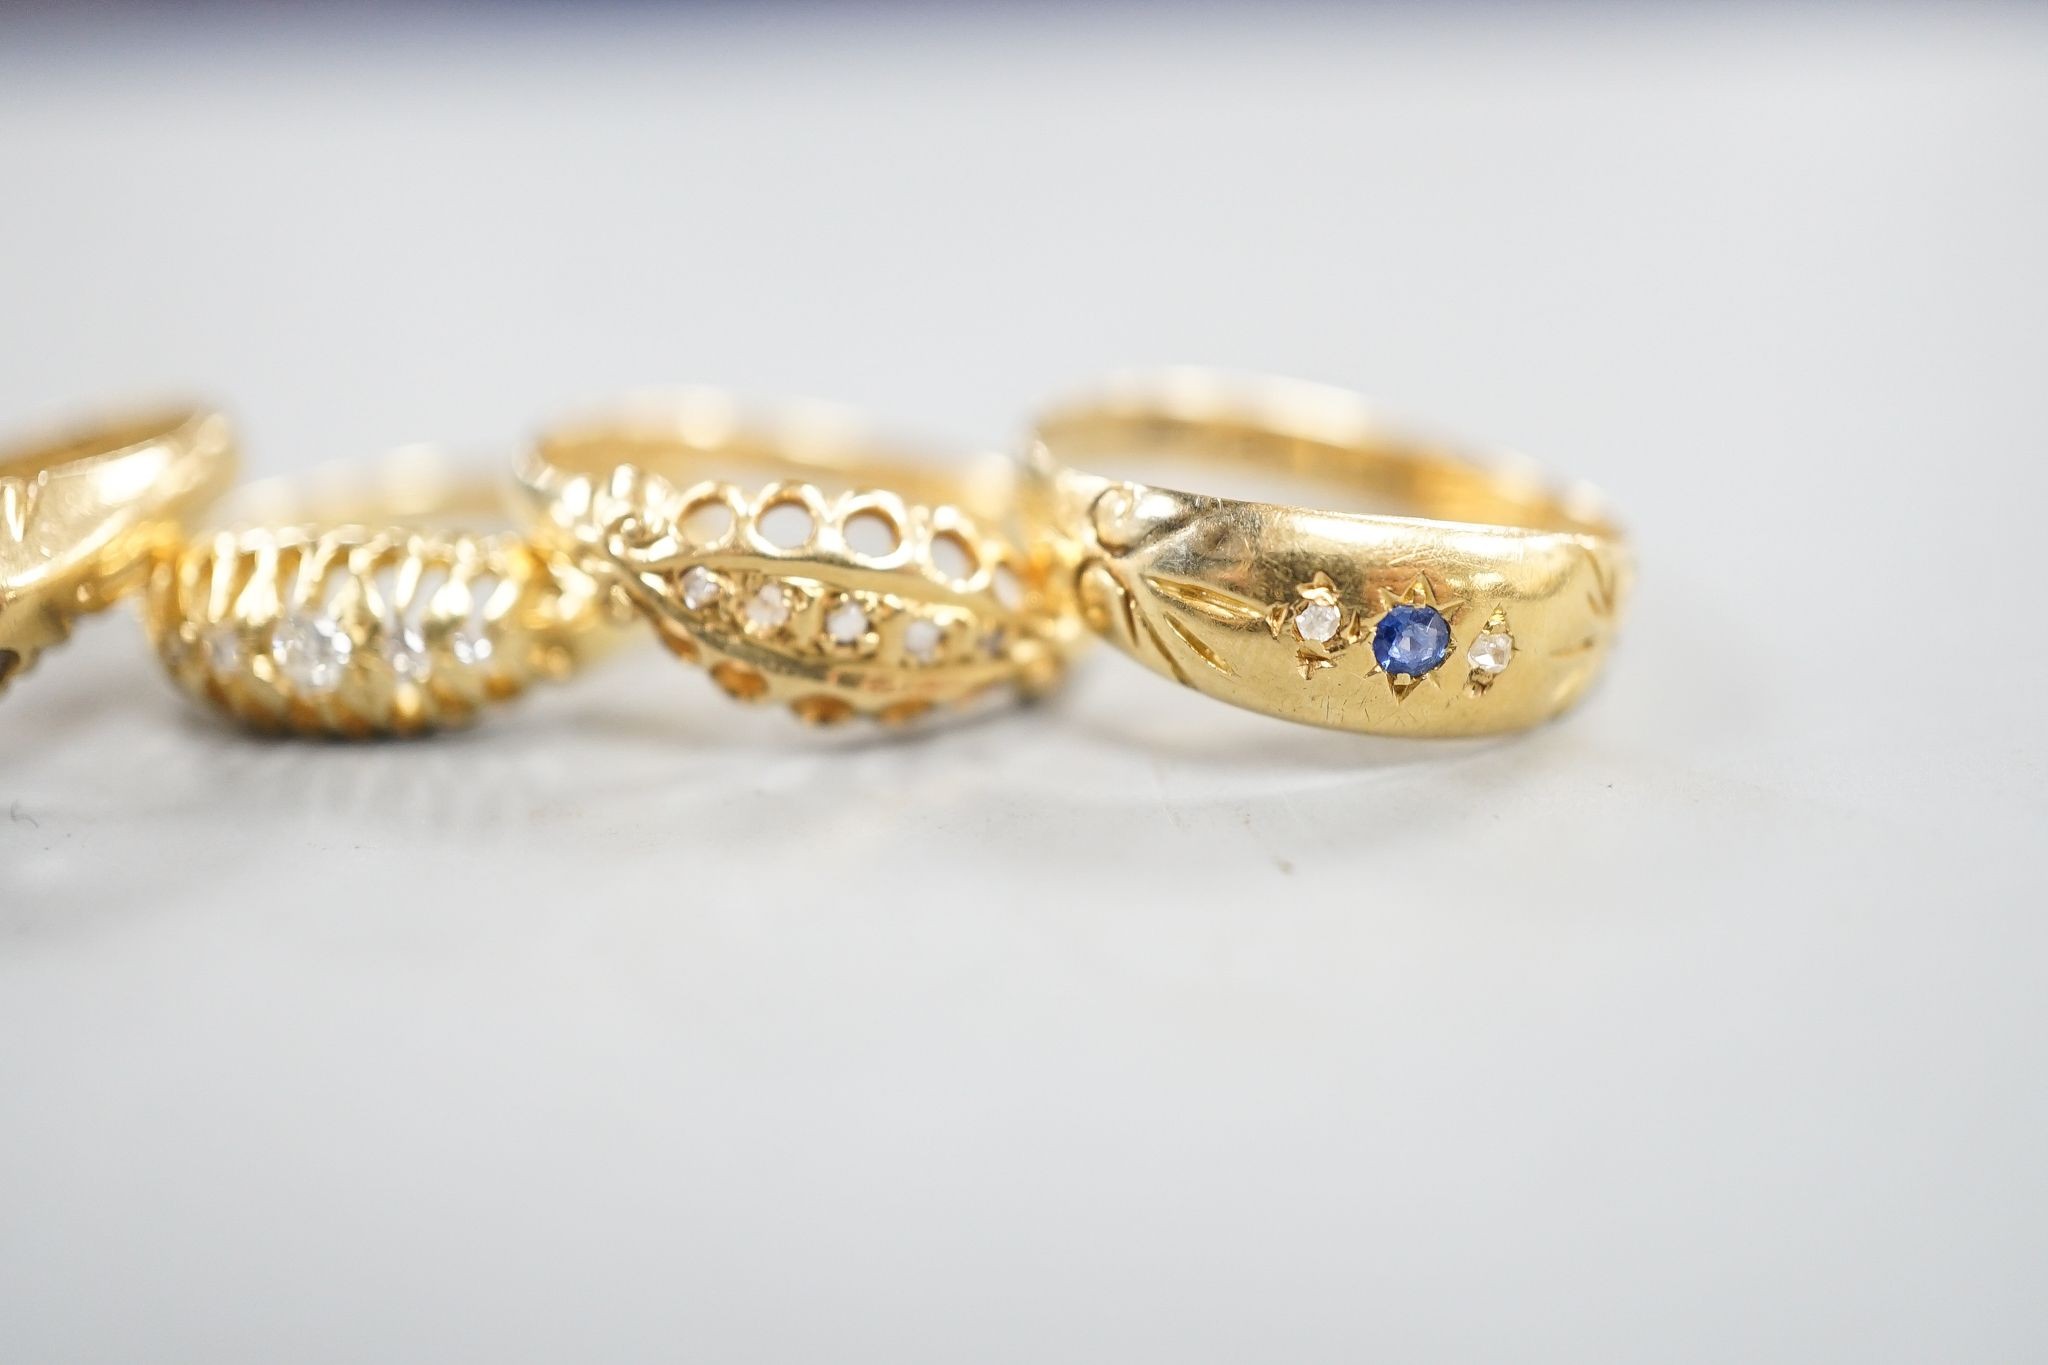 Three early 20th century 18ct gold and five stone diamond chip set rings, an 18ct , sapphire and diamond chip set ring and a late Victorian 18ct gold and solitaire diamond ring, gross weight 12.1 grams.